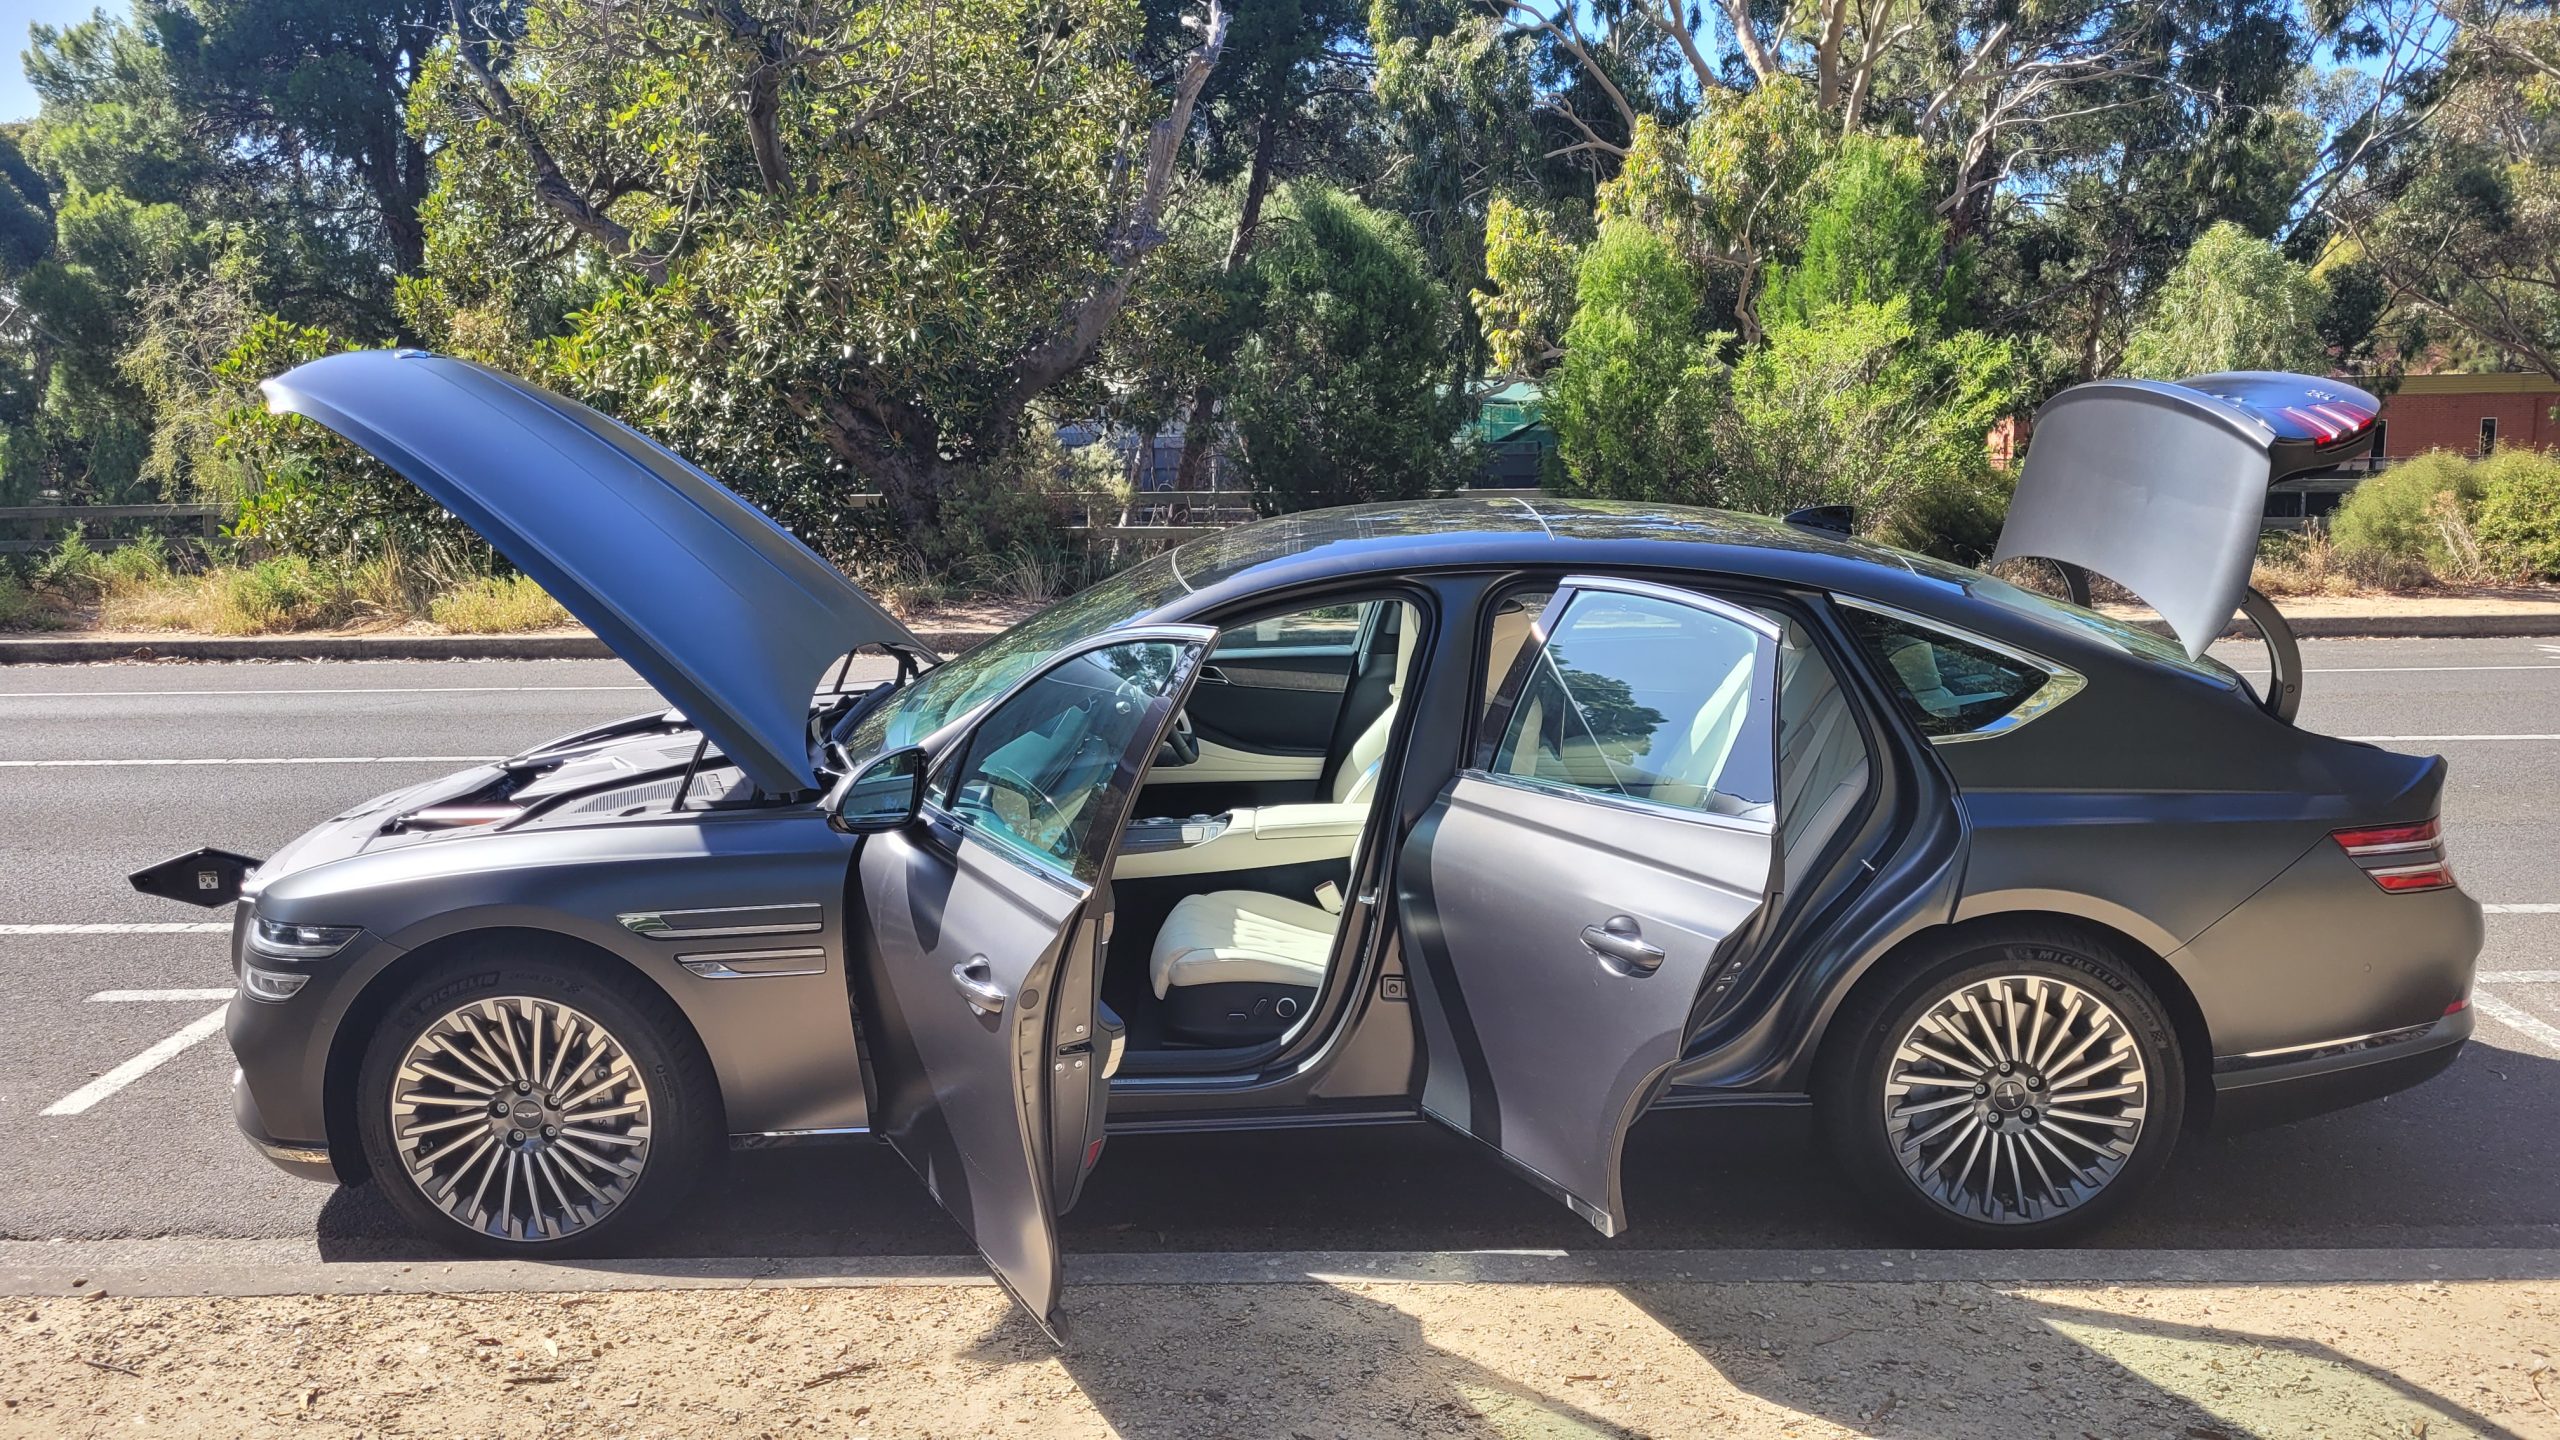 Genesis G80 electric vehicle left-hand side profile view with hood, doorsa and trunk open